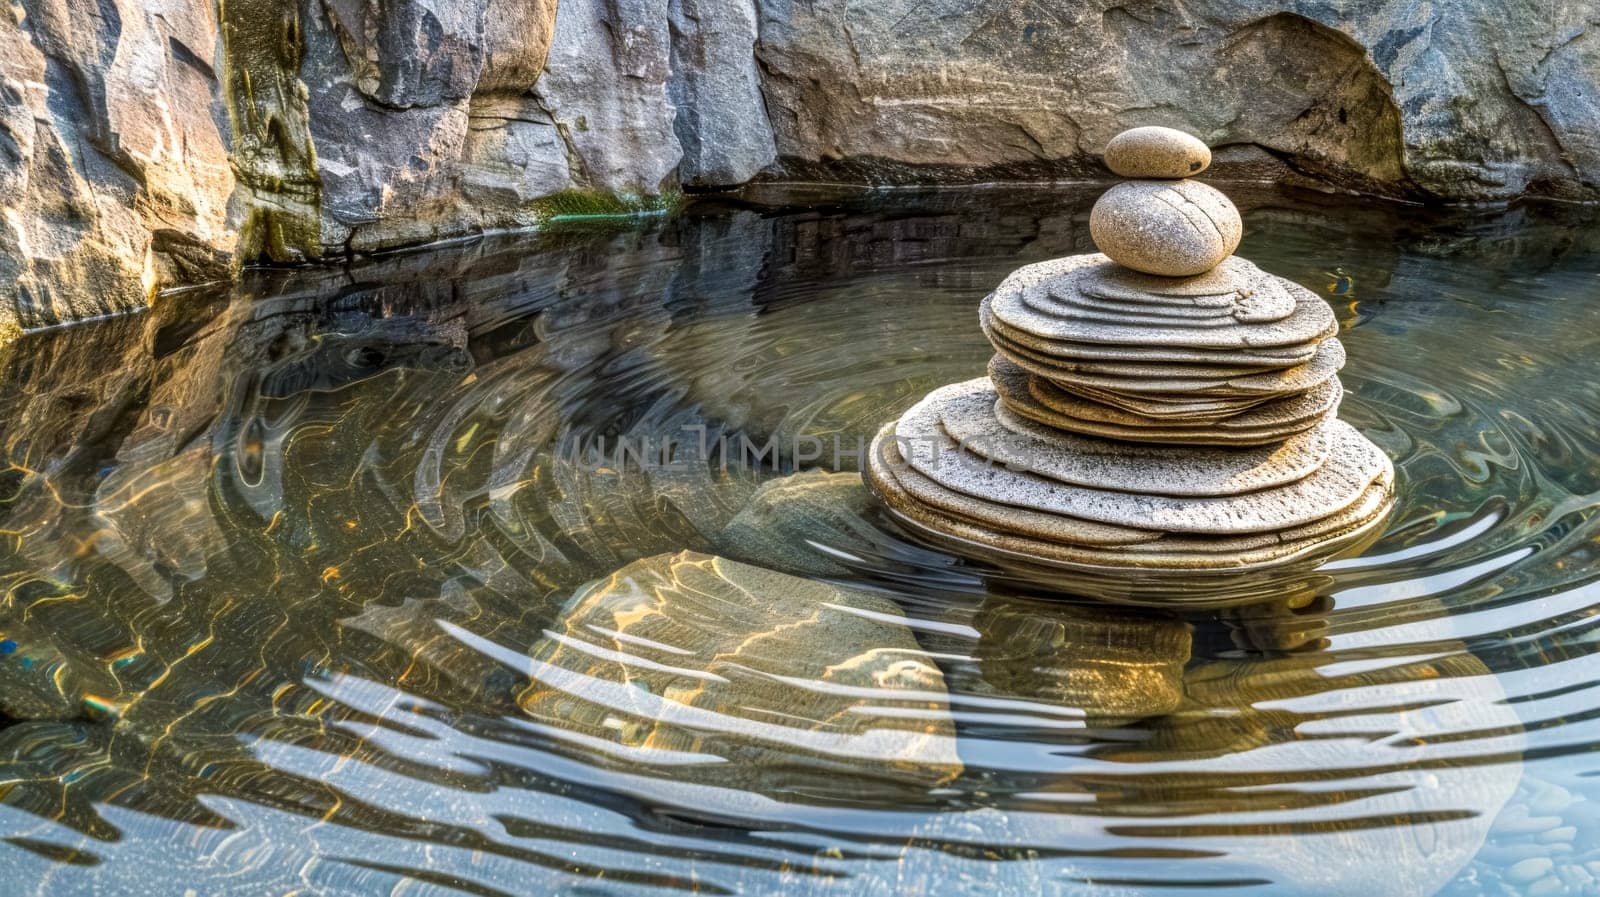 Balanced rock stack in tranquil pond against a cliff backdrop, symbolizing harmony